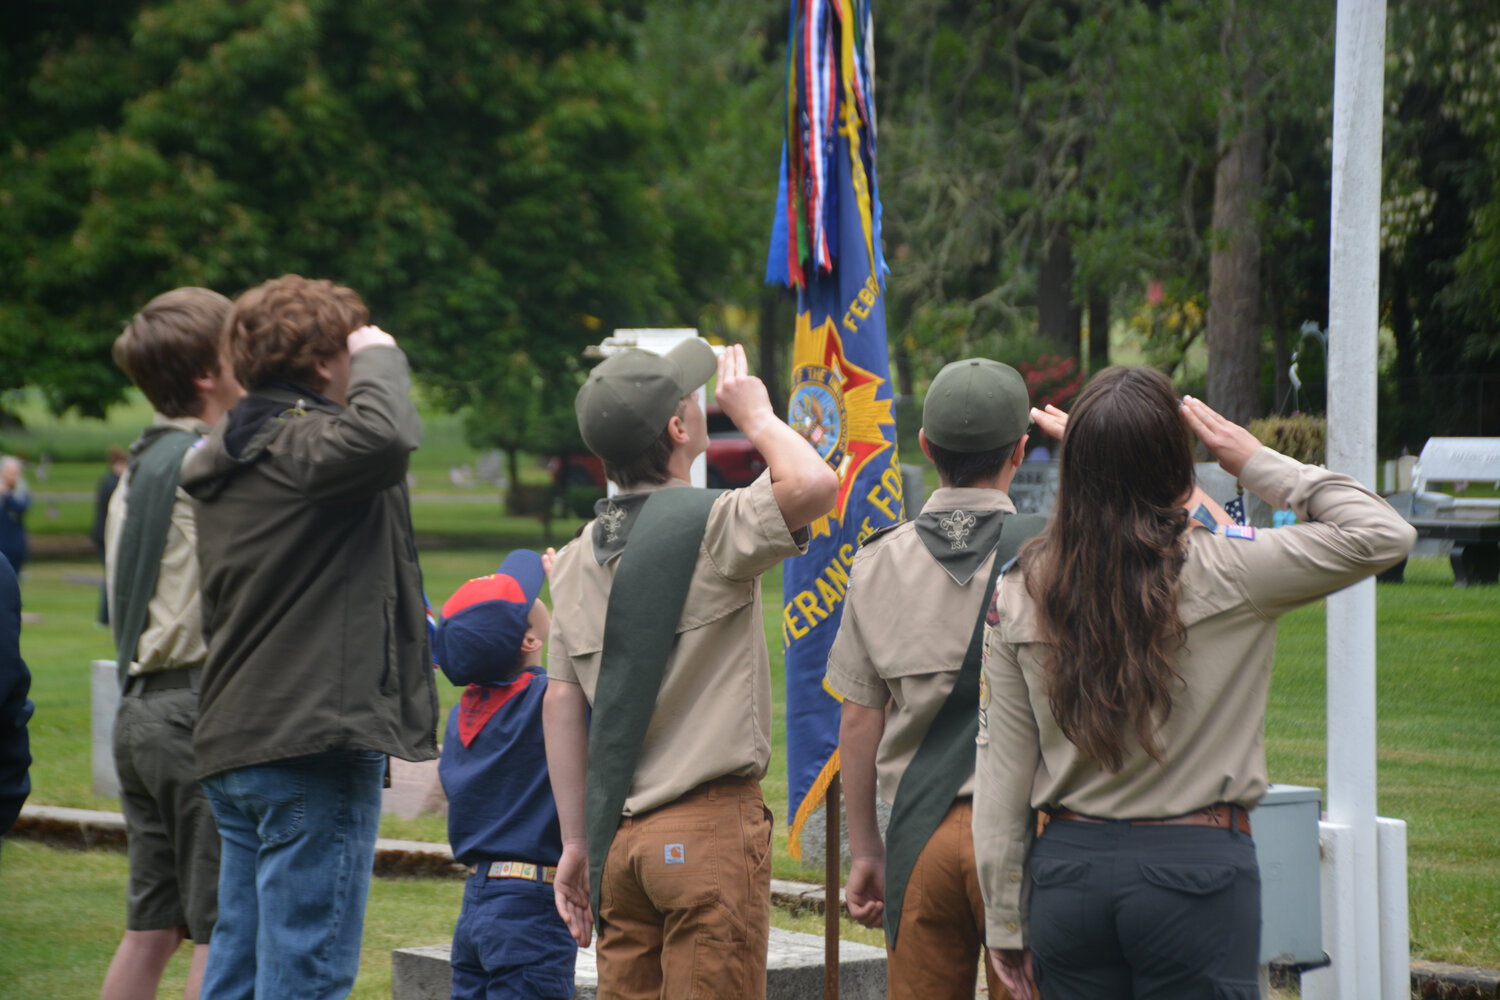 Members of the Boy Scouts of America salute the American Flag at the Memorial Day event at the Yelm Cemetery.